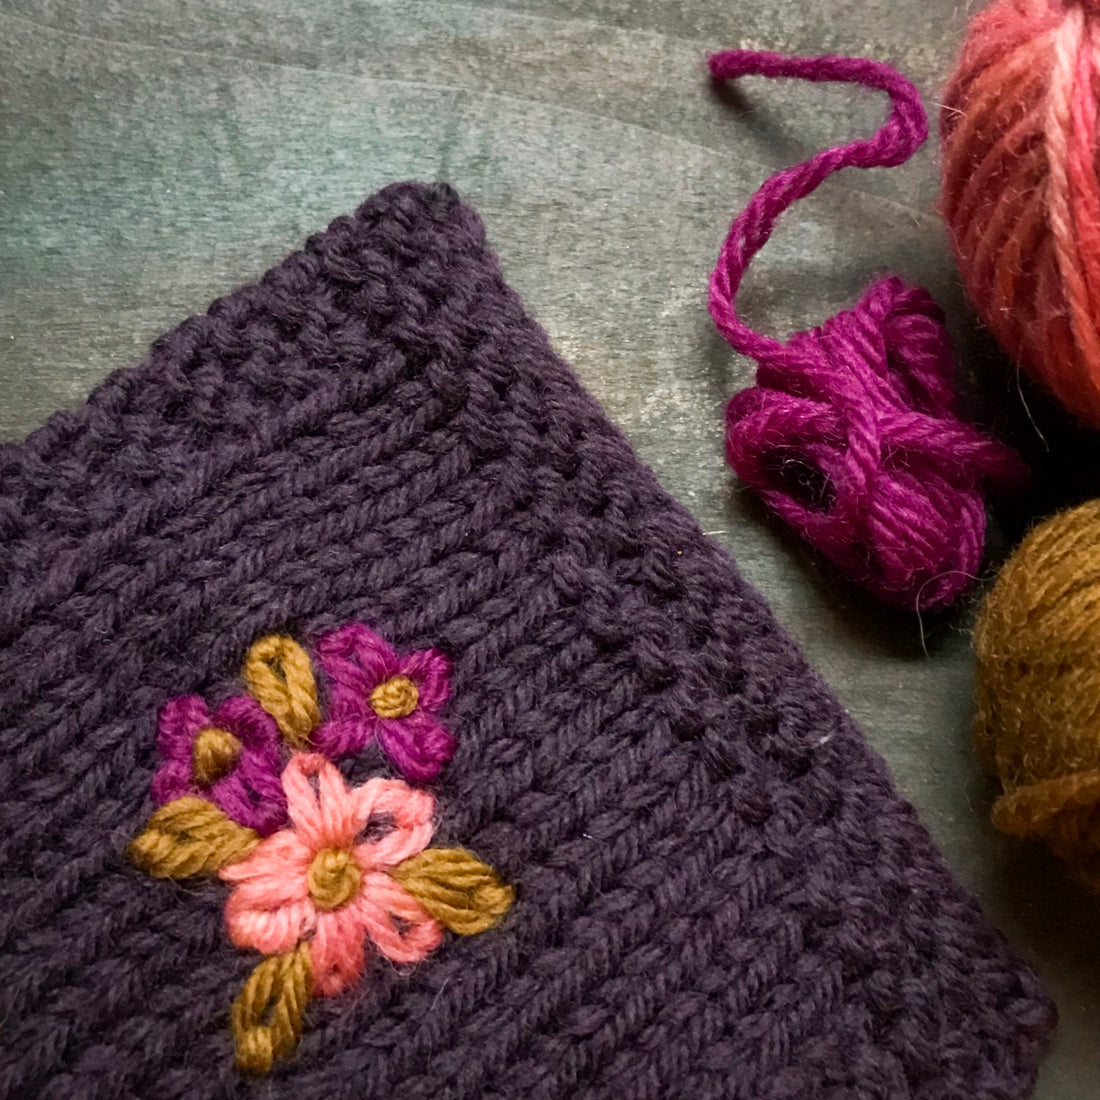 Machine embroidery tutorial: how to embroider flowers on knits